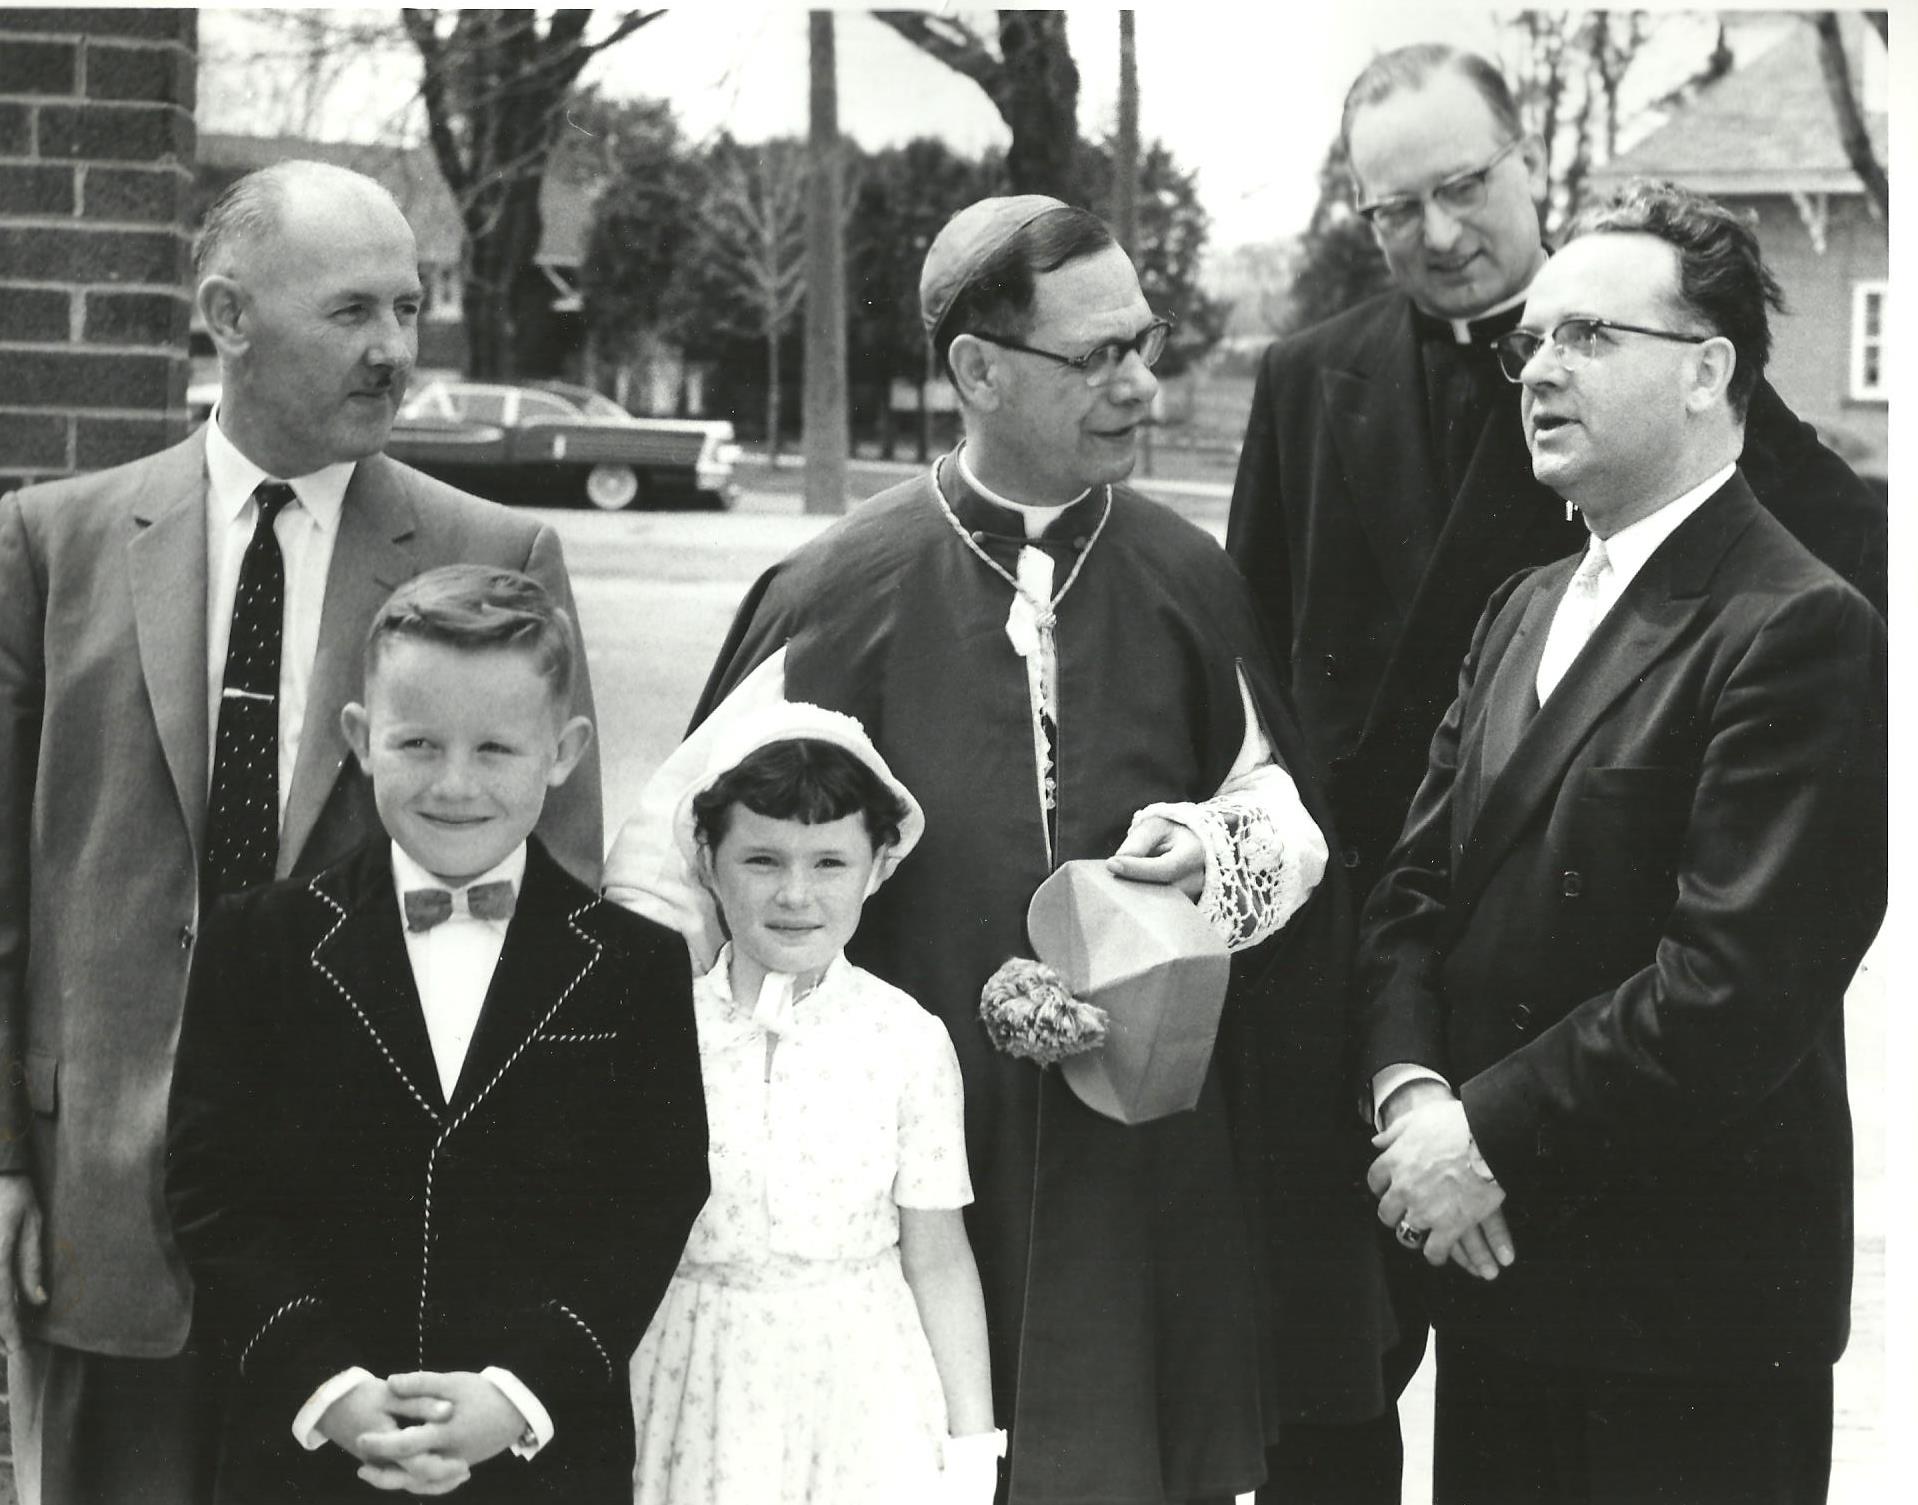 Bishop at the opening ceremony 1964